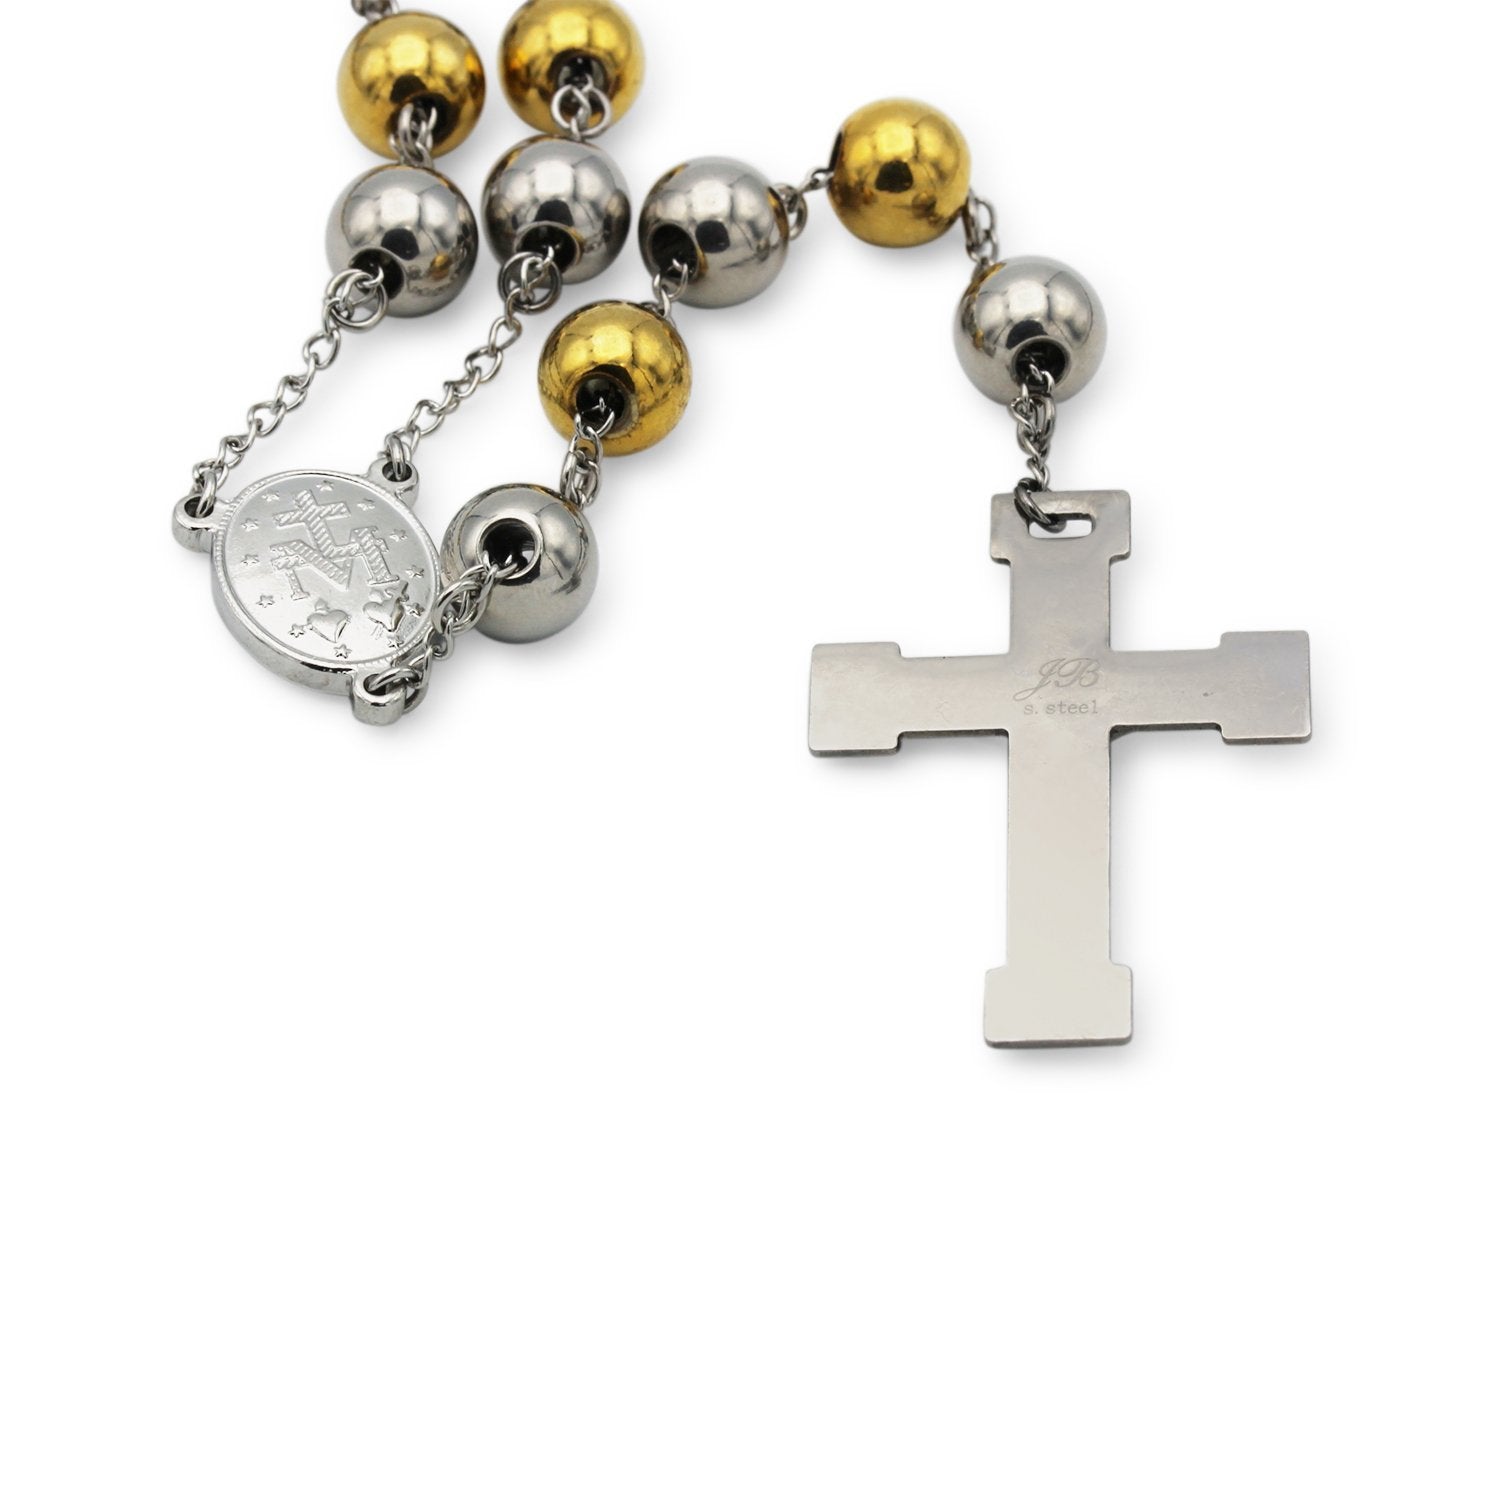 Traditional Rosary Necklace Five Decade Silver Gold Catholic Prayer Beads 10 mm